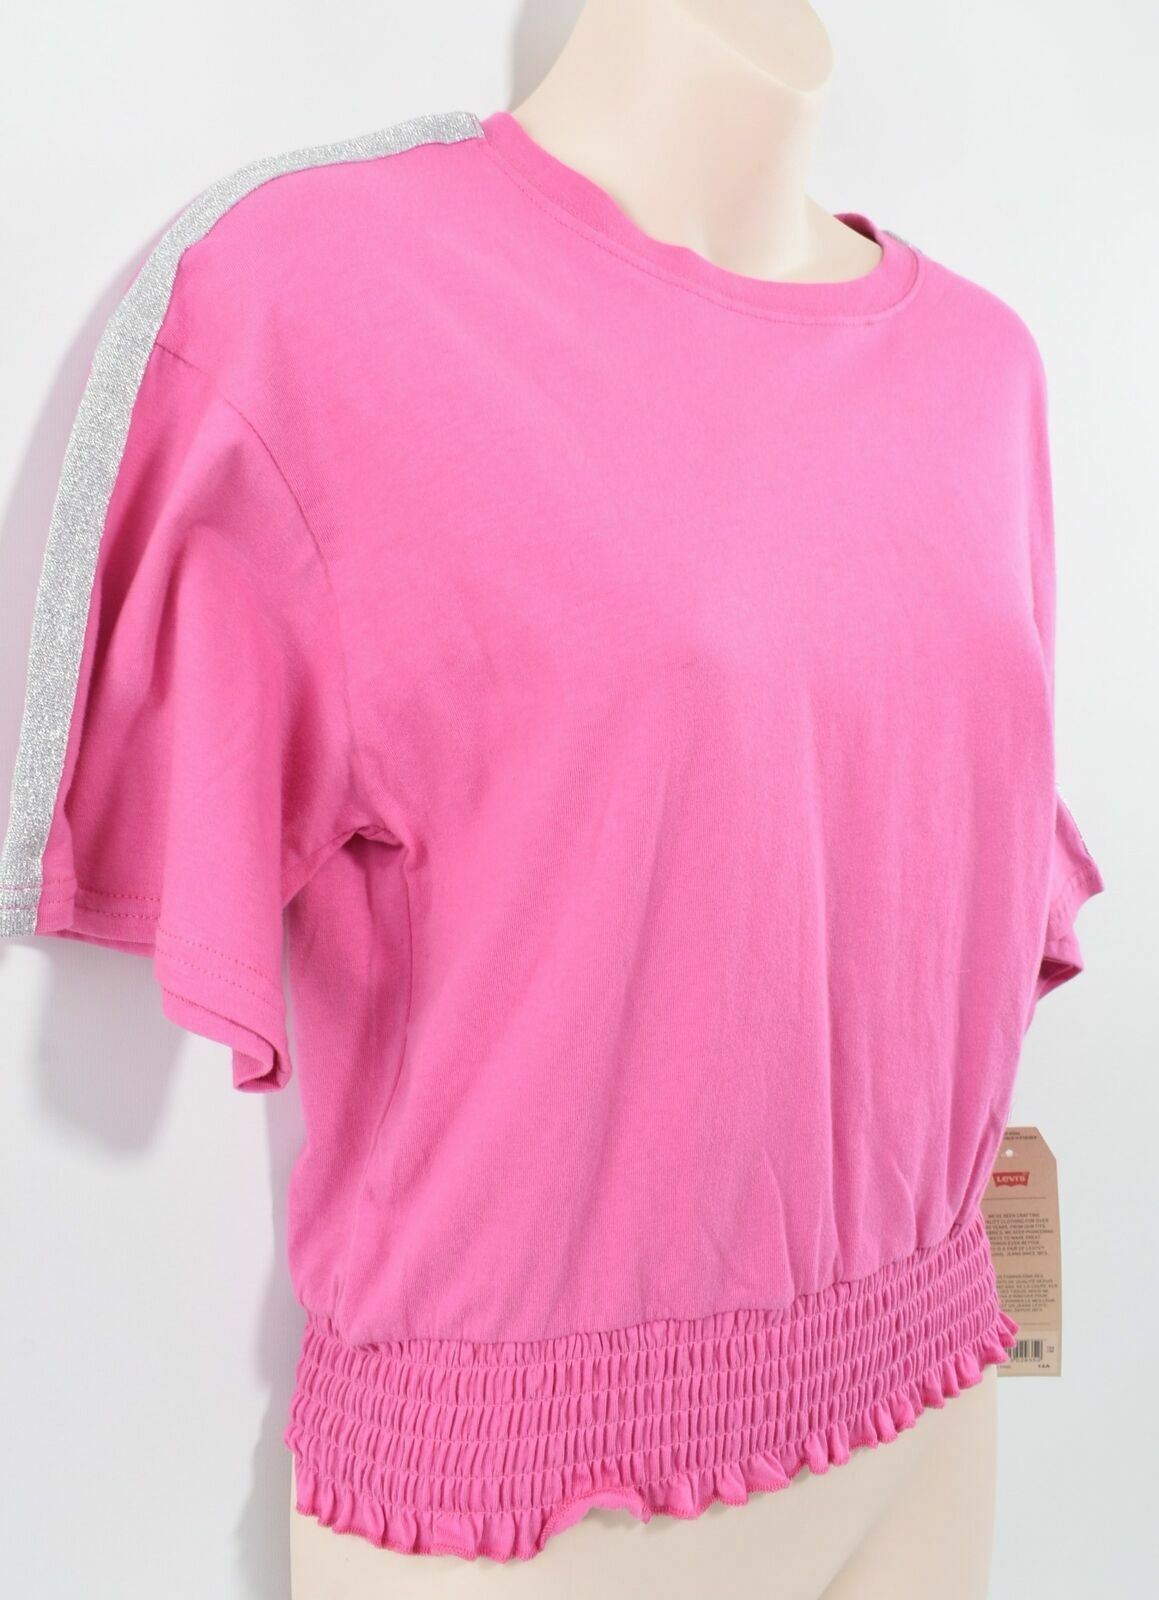 LEVI'S Girls Pink Cropped Short Sleeve Crew Neck T-Shirt- size 14 years